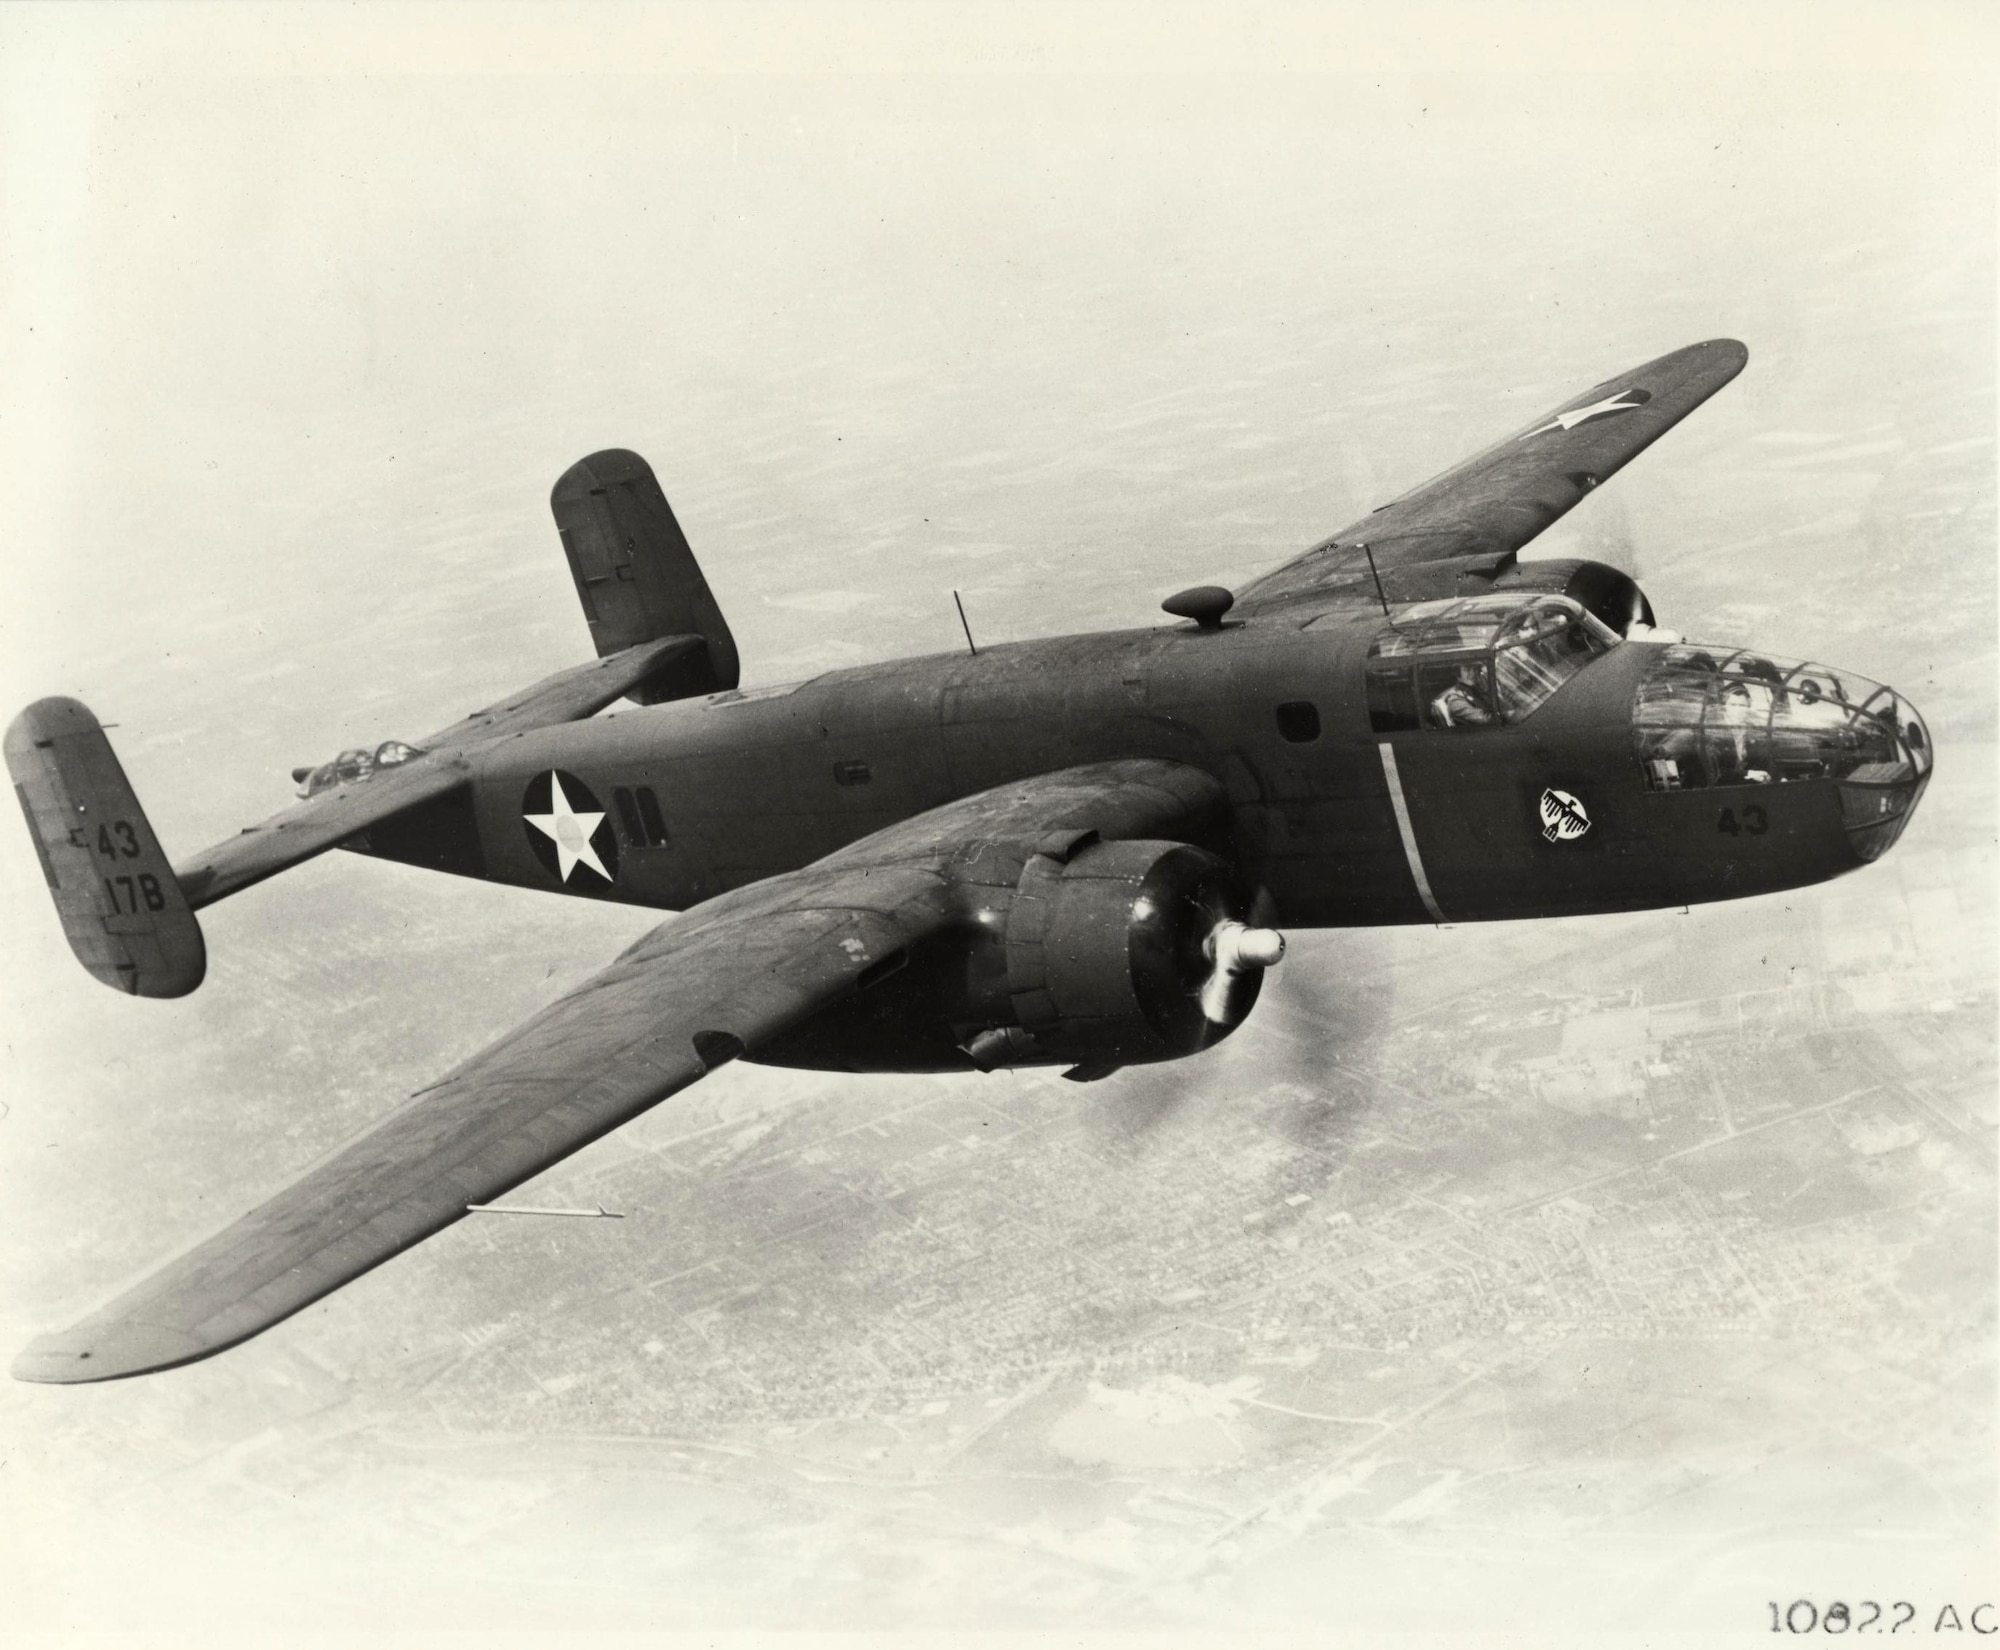 A B-25 assigned to the 34th Squadron participating in the historic Doolittle Raid April 18, 1942. “We have the proud honor and distinct privilege of being Raider posterity – Jimmy Doolittle's ‘own’ 34th, 37th and 432nd squadrons,” said Lt. Col. John Martin, 34th Bomb Squadron commander, referring to the fact that Ellsworth is now home to three of the four squadrons that participated in the raid. (U.S. Air Force courtesy photo)